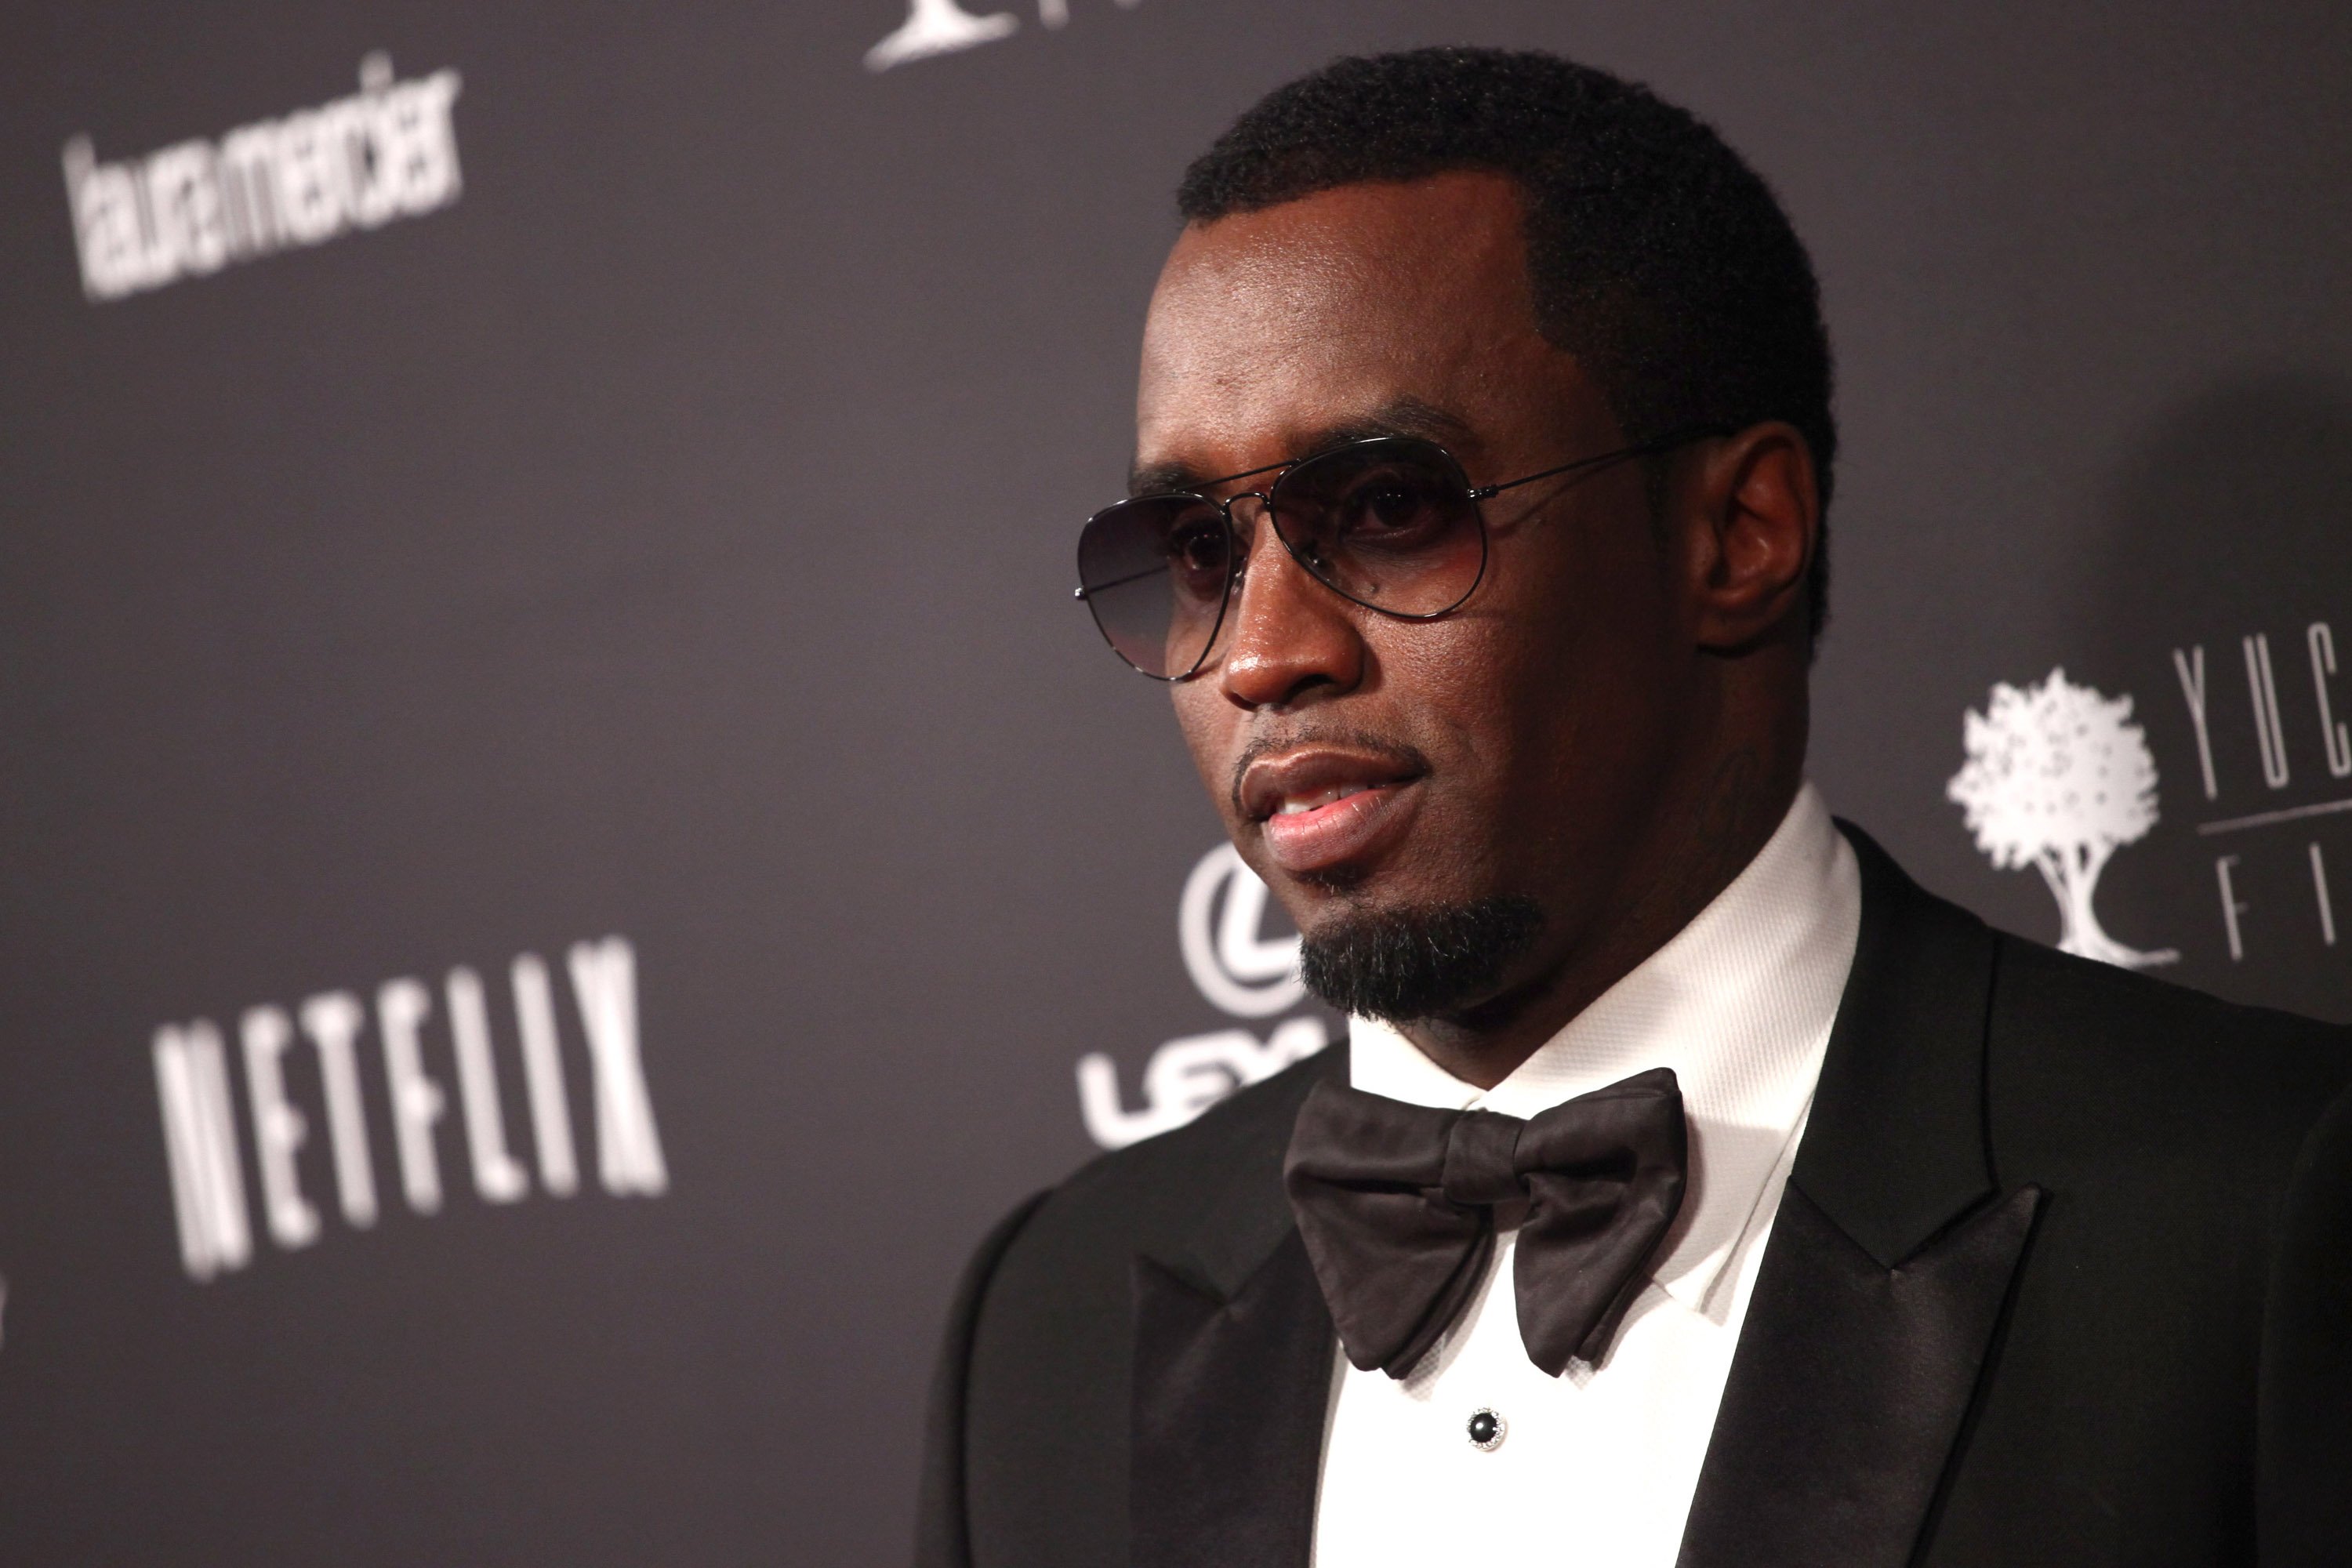 Sean "Diddy" Combs attends The Weinstein Company & Netflix's 2014 Golden Globes After Party at The Beverly Hilton Hotel on January 12, 2014 in California. | Photo: Getty Images